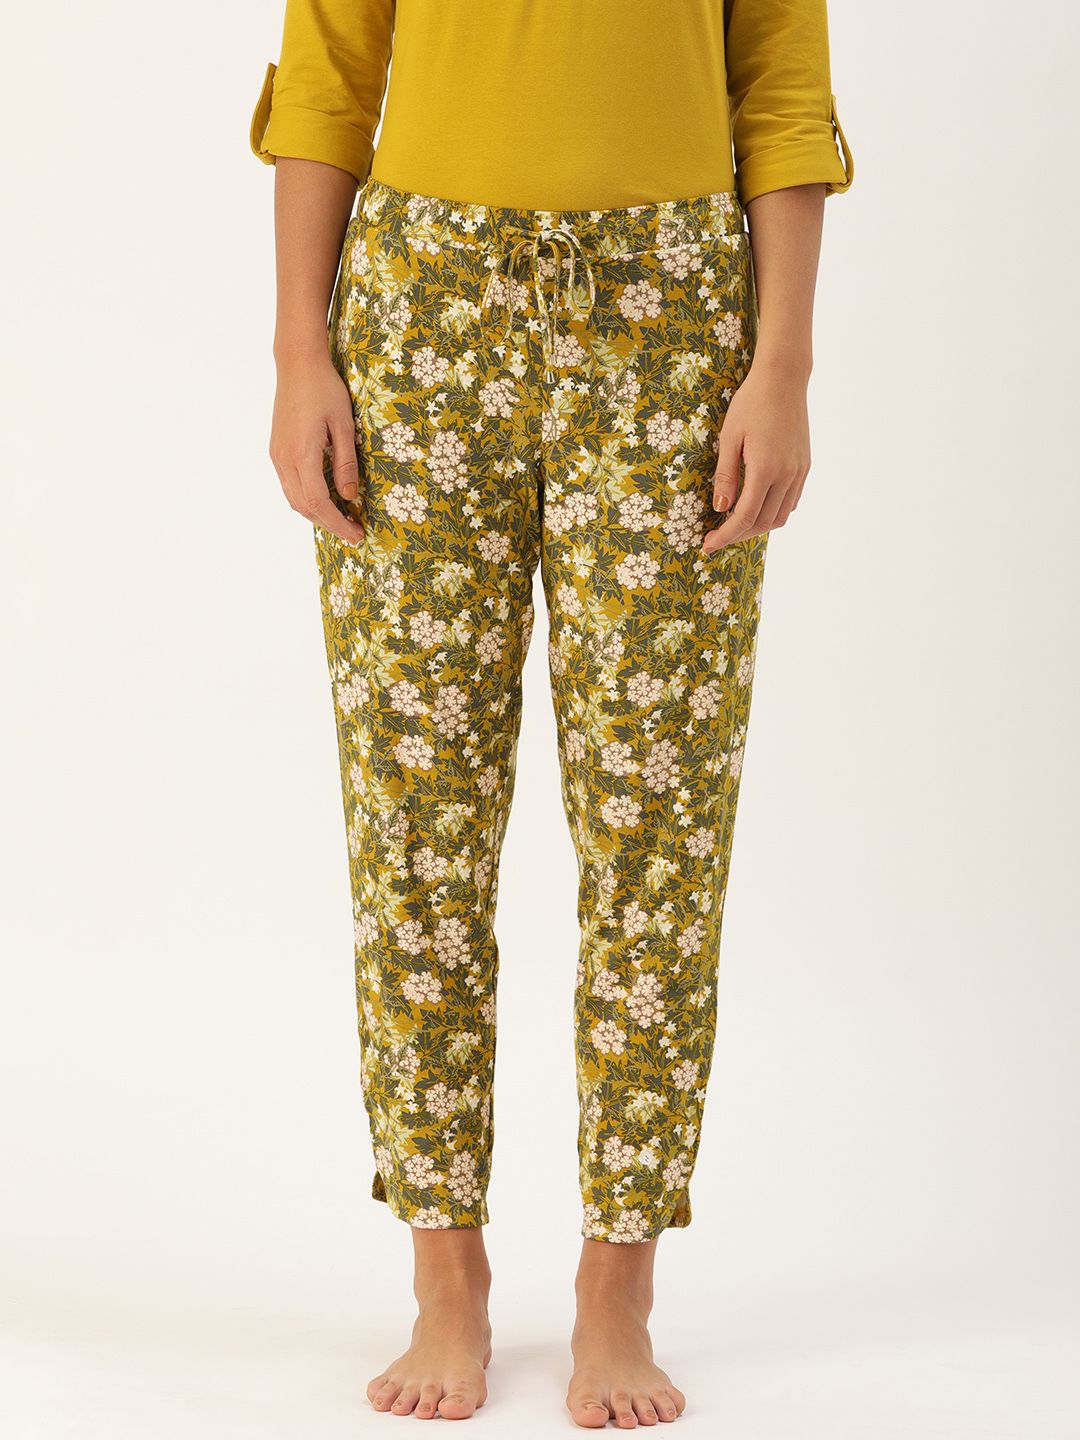 Enamor Women  Mustard Yellow Charcoal Grey Floral Print Relaxed Fit Shop in Pyjama Lounge Pants Price in India